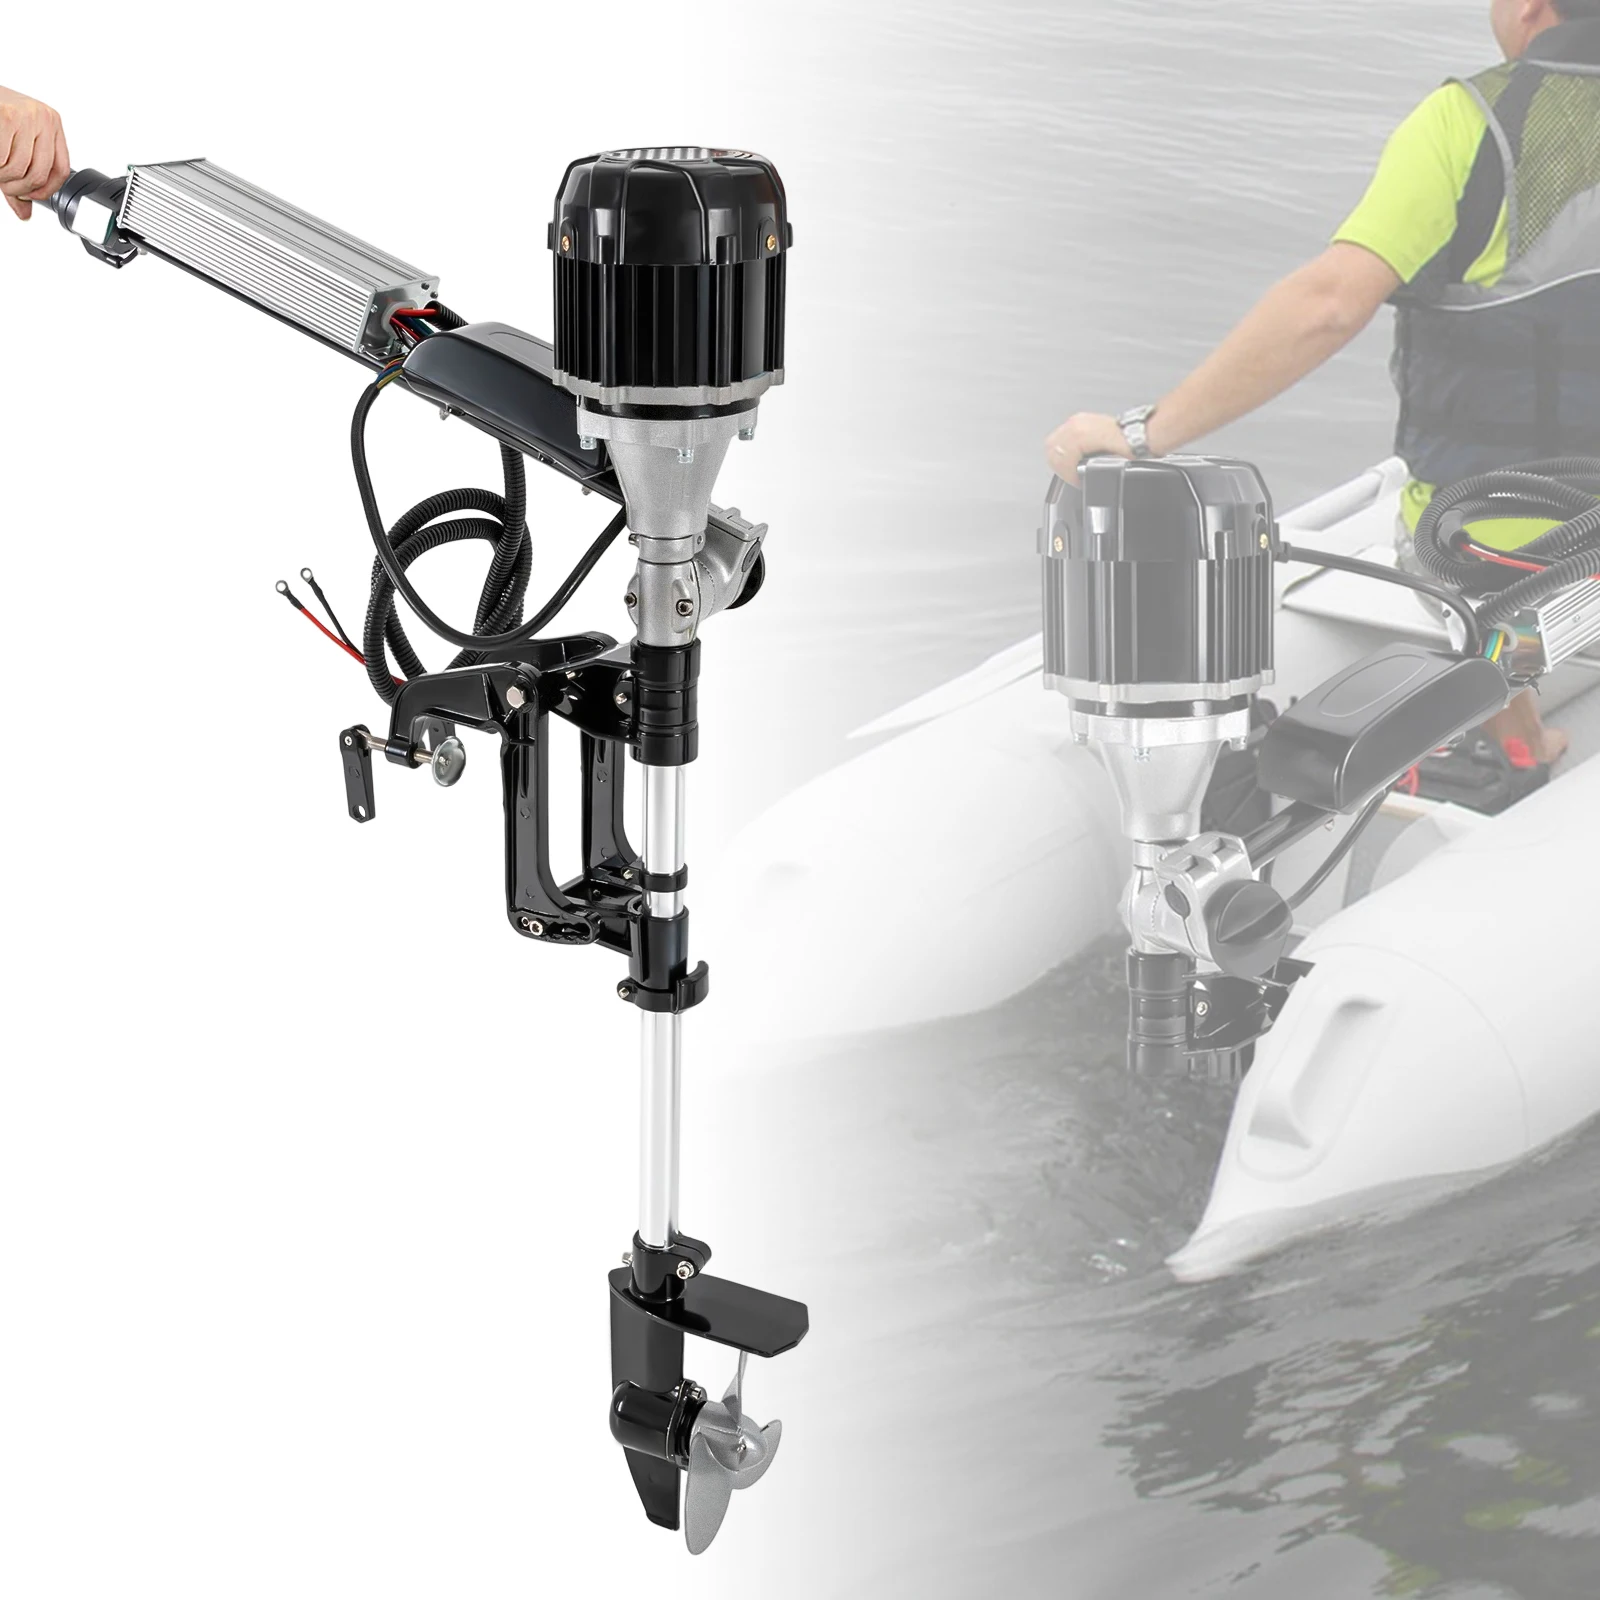 5HP Electric Outboard Motor Boat Engine 48V 1000W Electric Start Marine Trolley Driver Brushless Motor Propeller trolley 41 cm tann s les fantaisies enora rose bleu marine